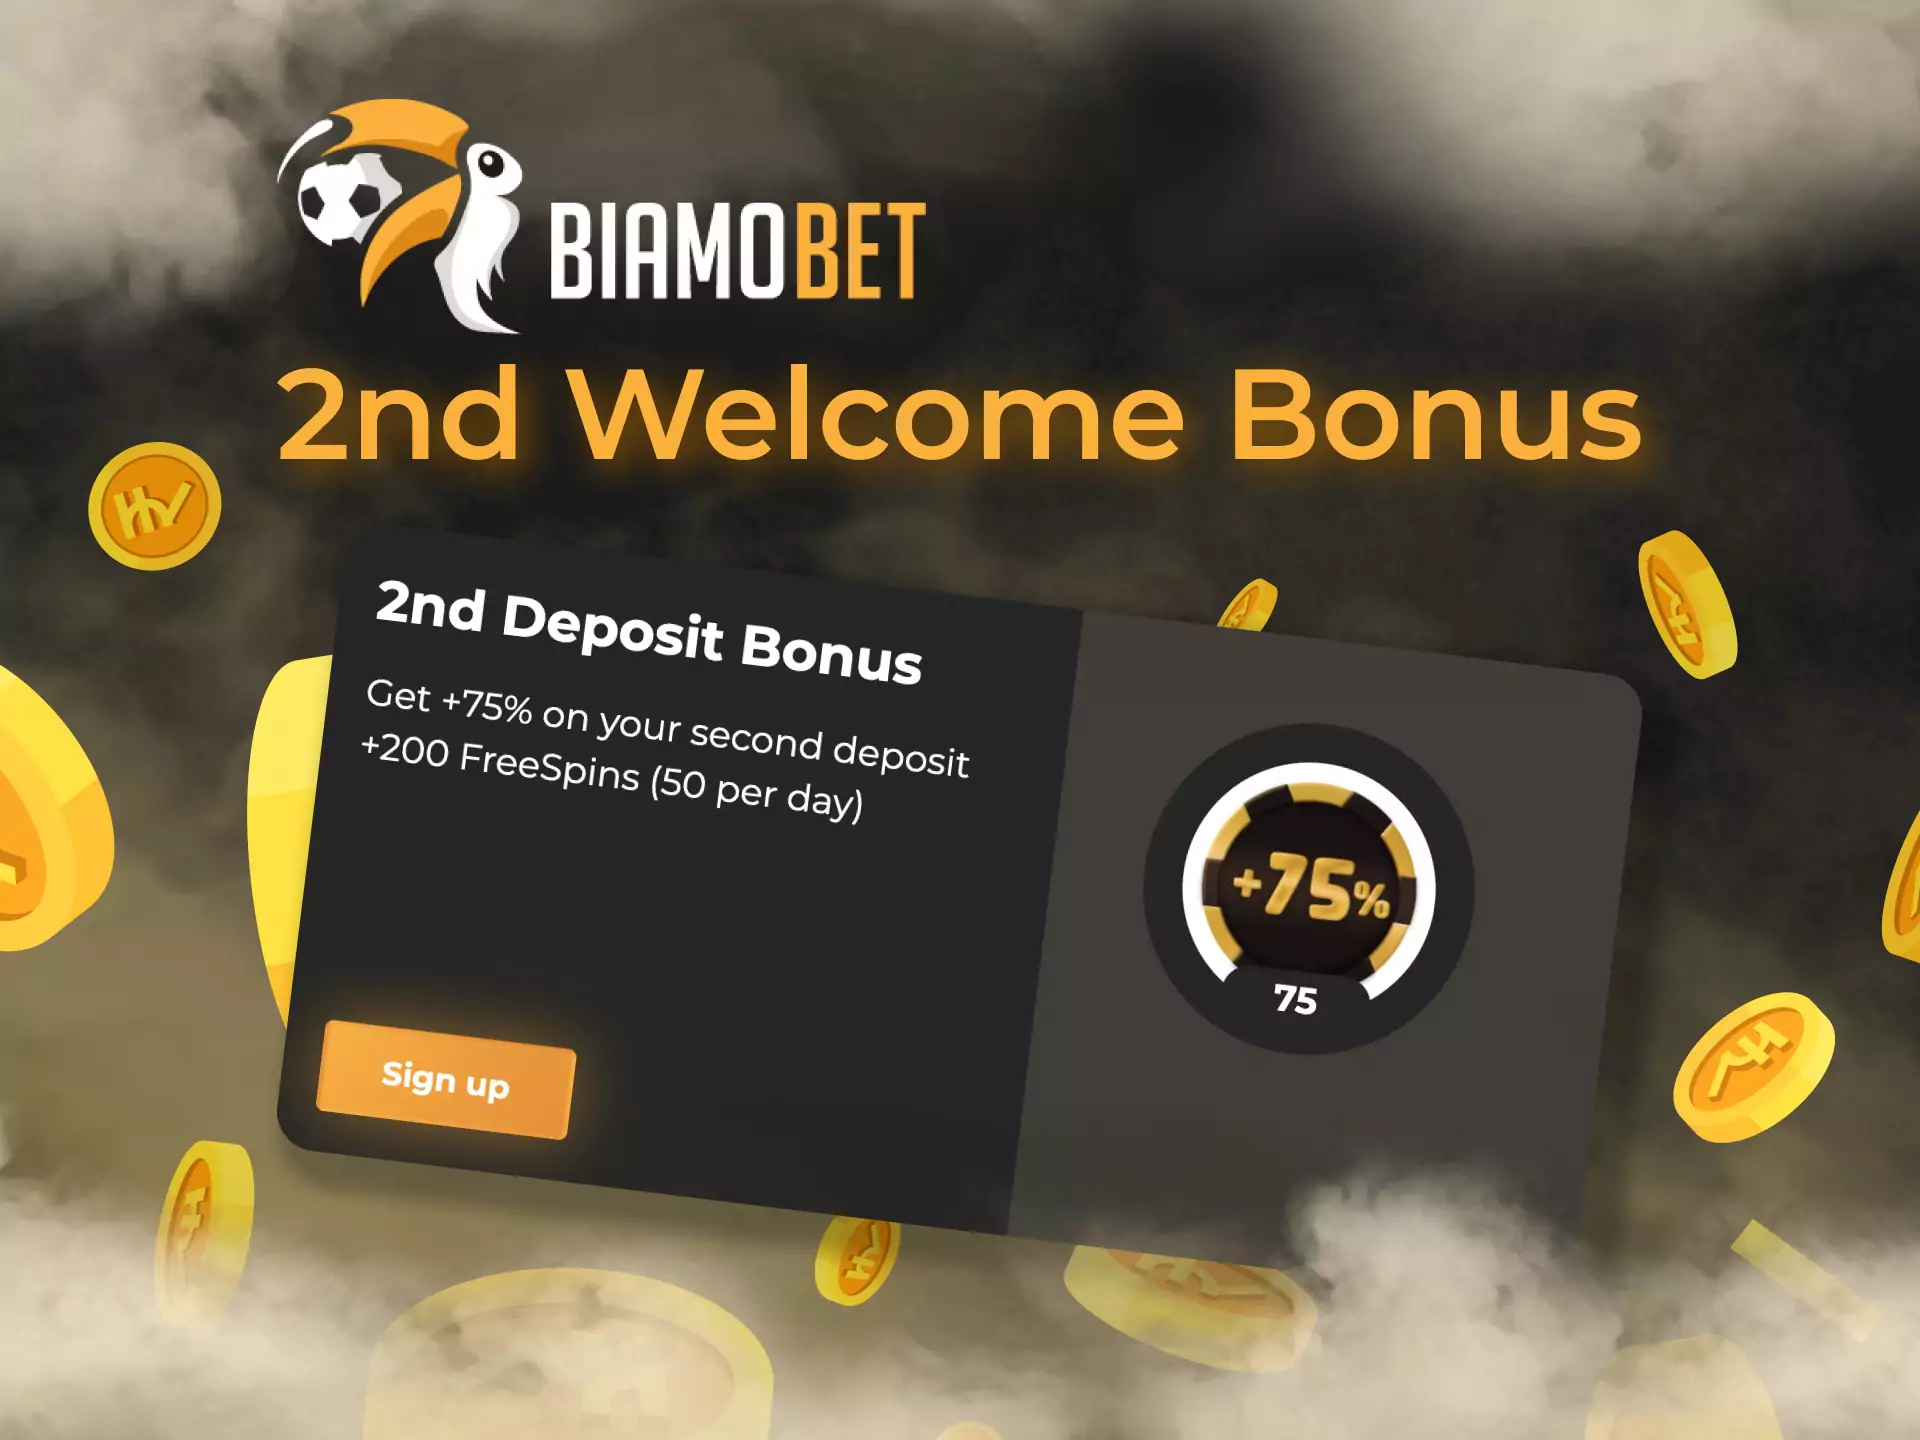 If you like the service of Biamobet, make the second deposit and get a bonus from the bookmaker.